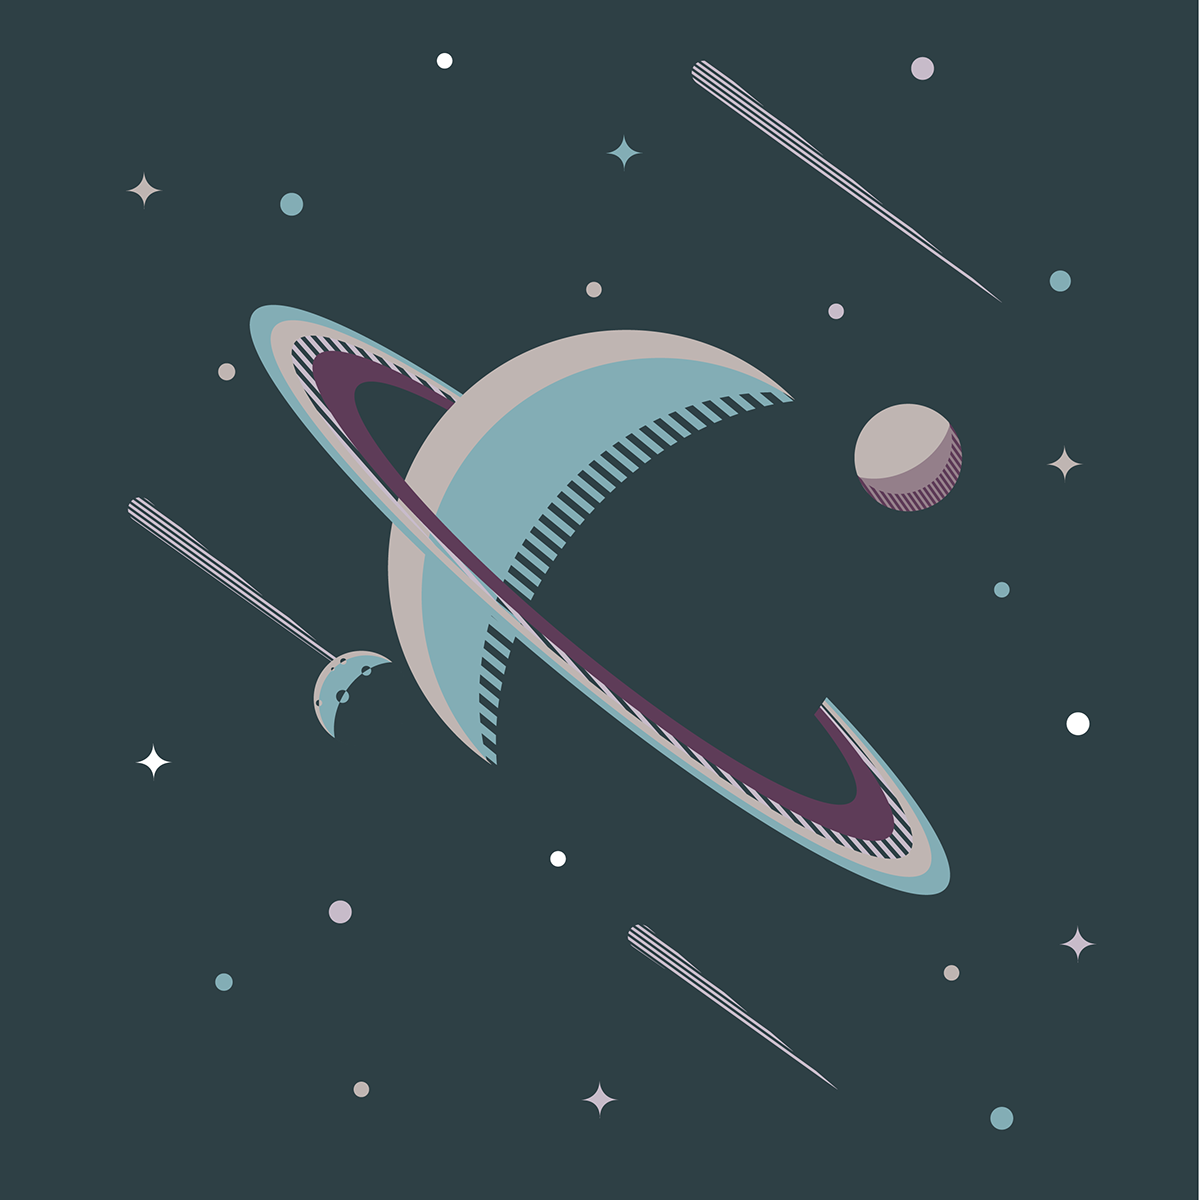 Space graphic